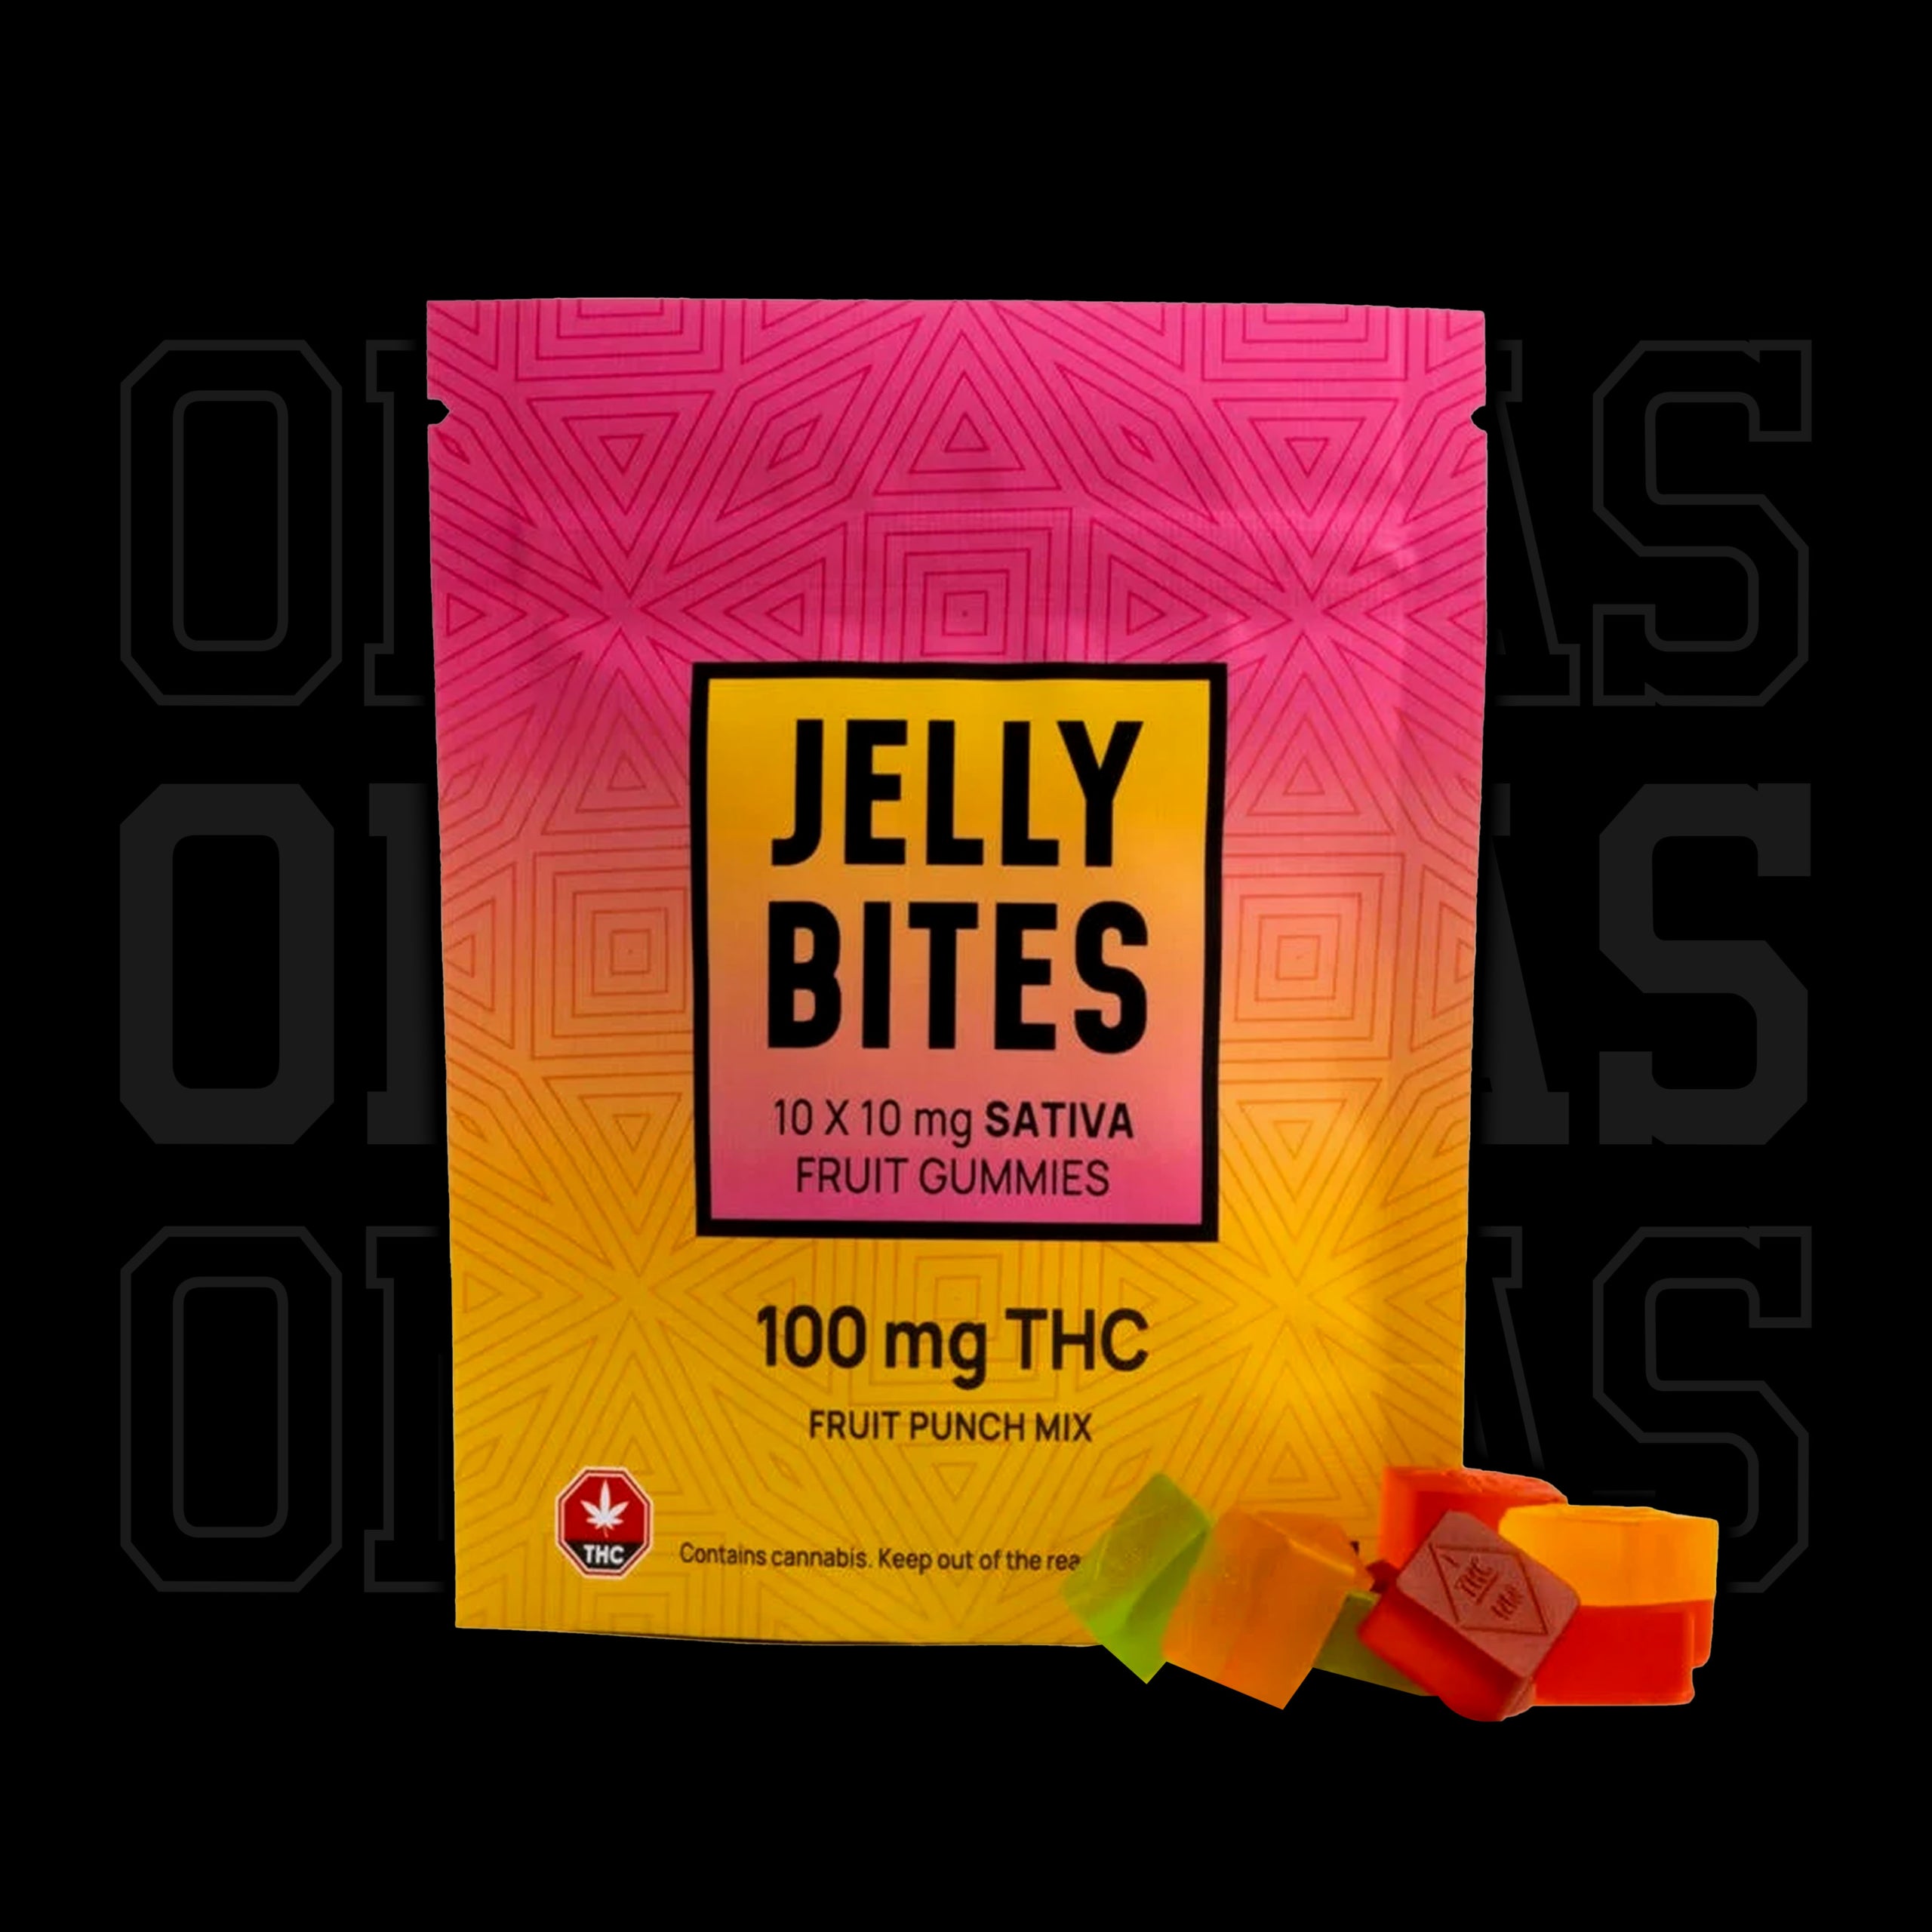 8edibles-twisted-extracts-caramelts-80mg-thc-indica-1024×1024-1